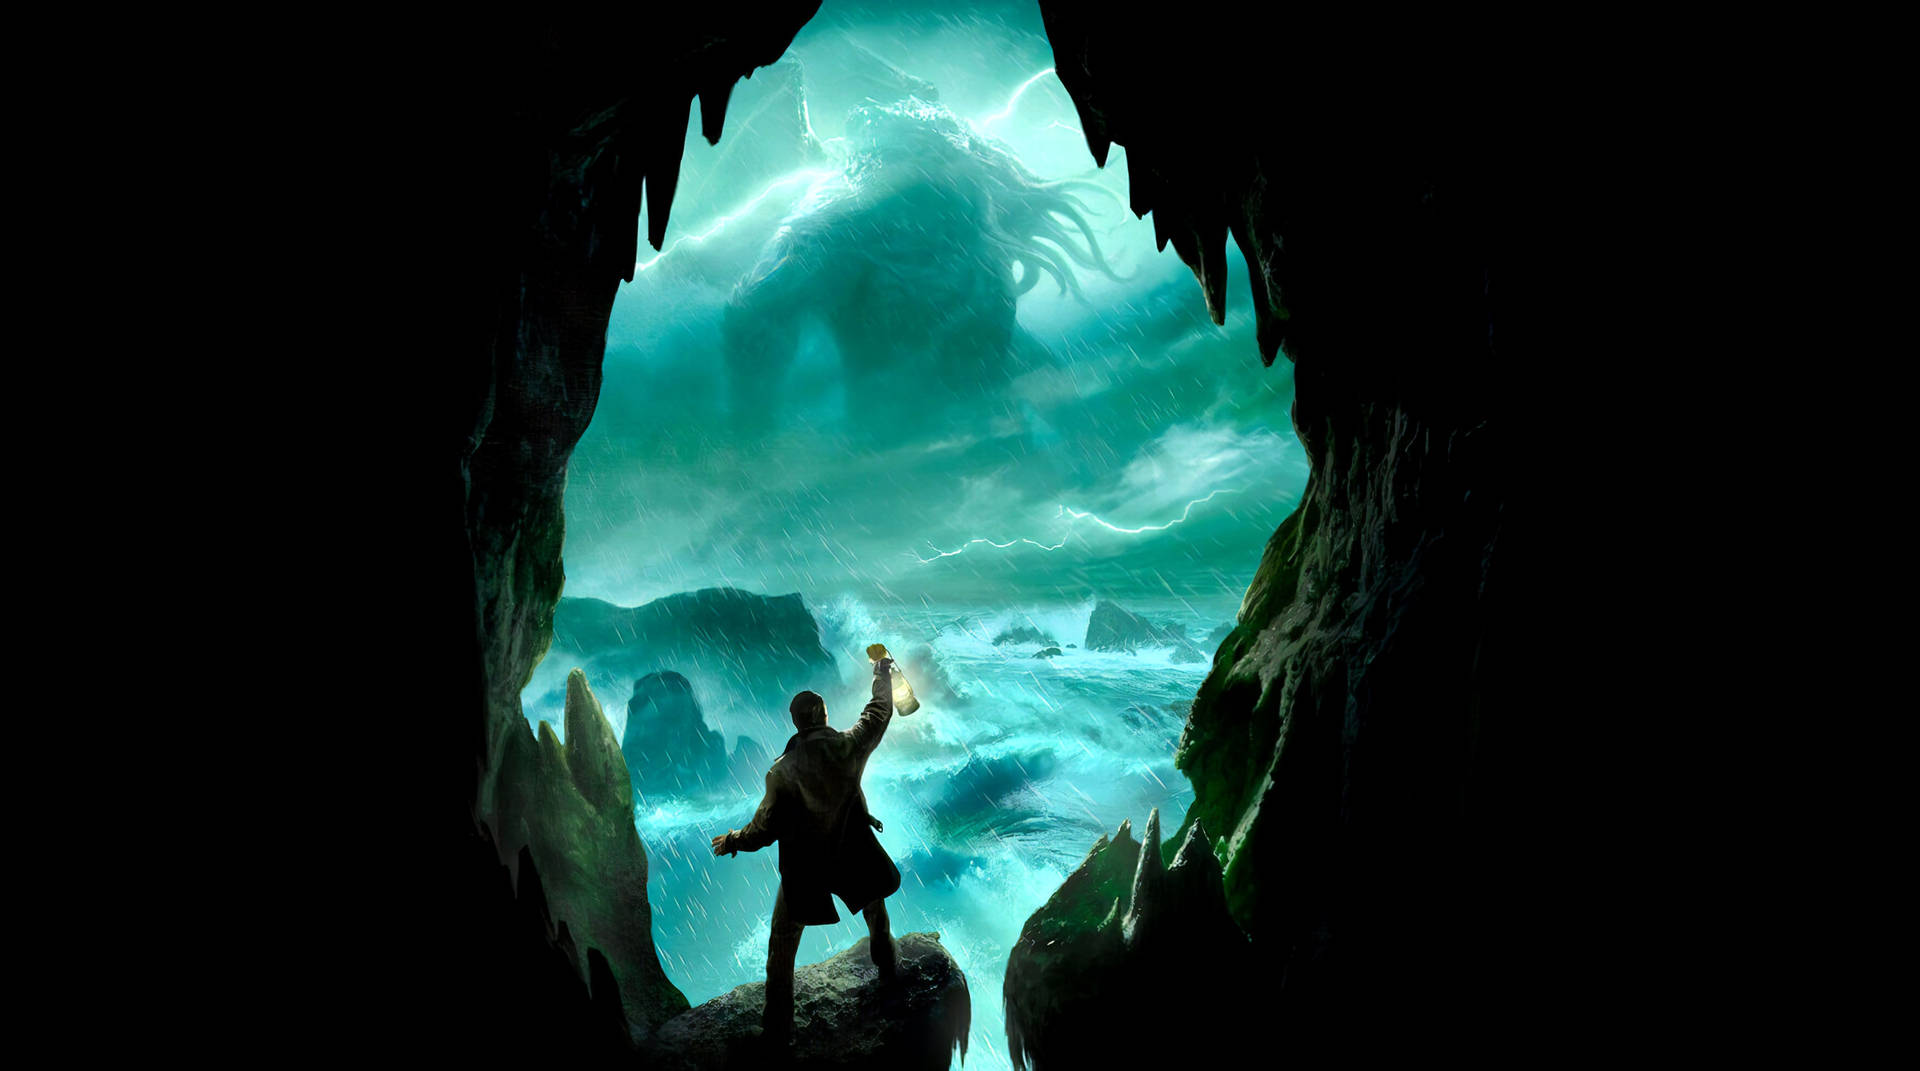 An explorer investigates a mysterious cave, unaware of the legendary creature hiding within. Wallpaper